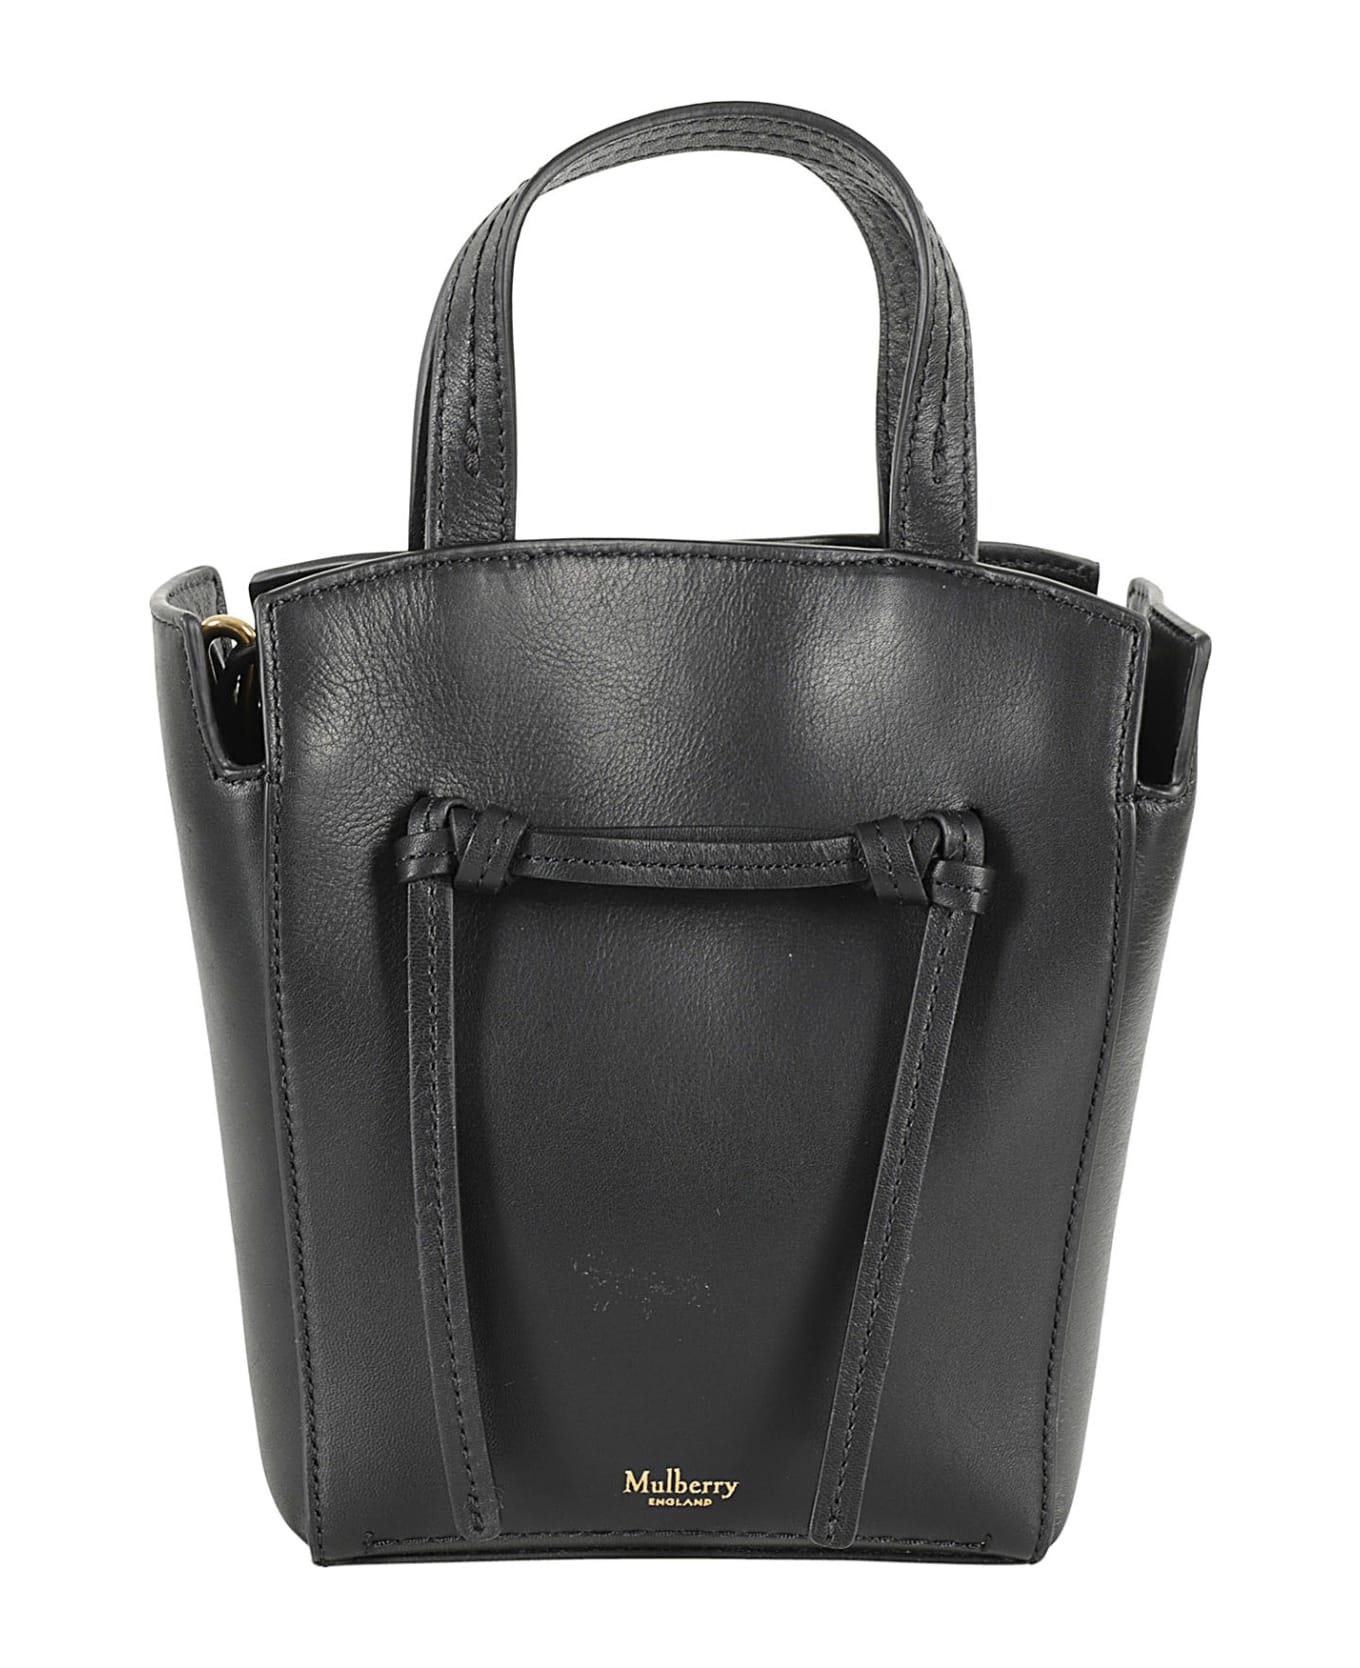 Mulberry Clovelly Mini Tote - Black トートバッグ